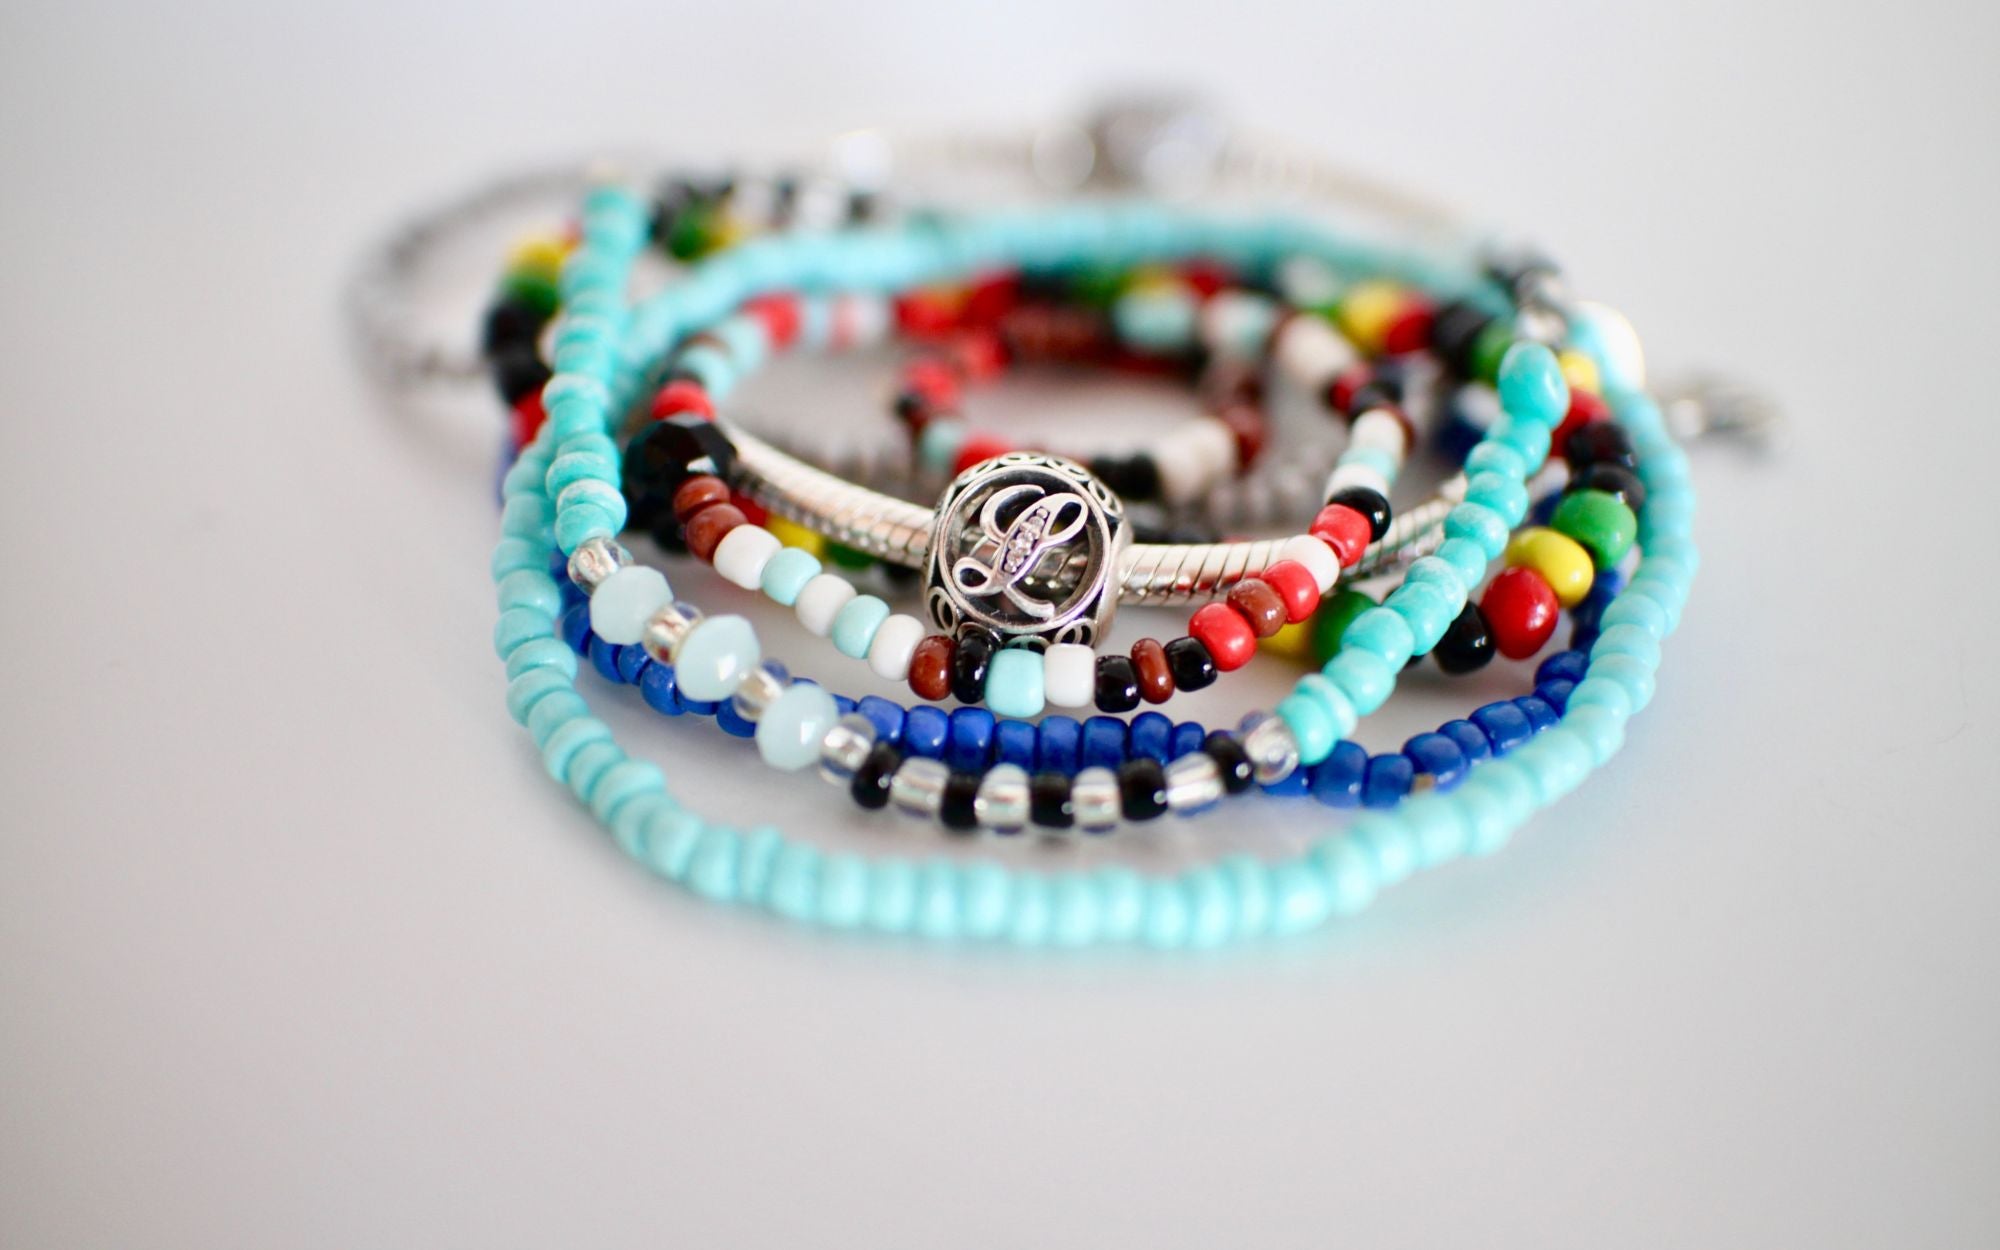 how to make a protection bracelet - types of protection bracelets